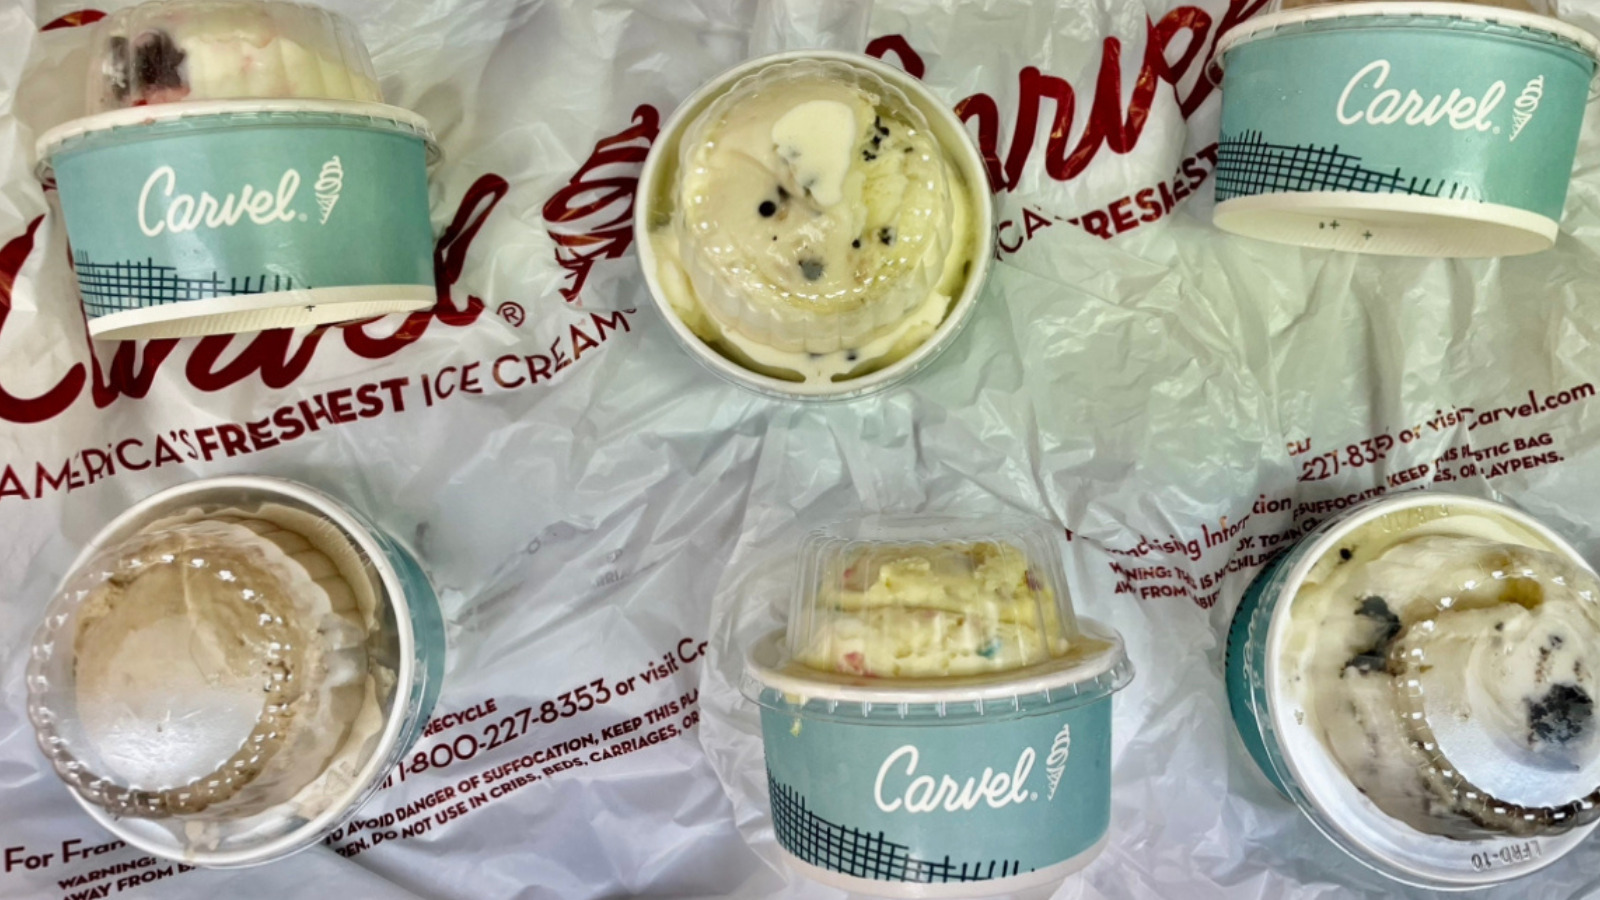 Carvel Ice Cream Flavors Ranked Worst To Best – Mashed